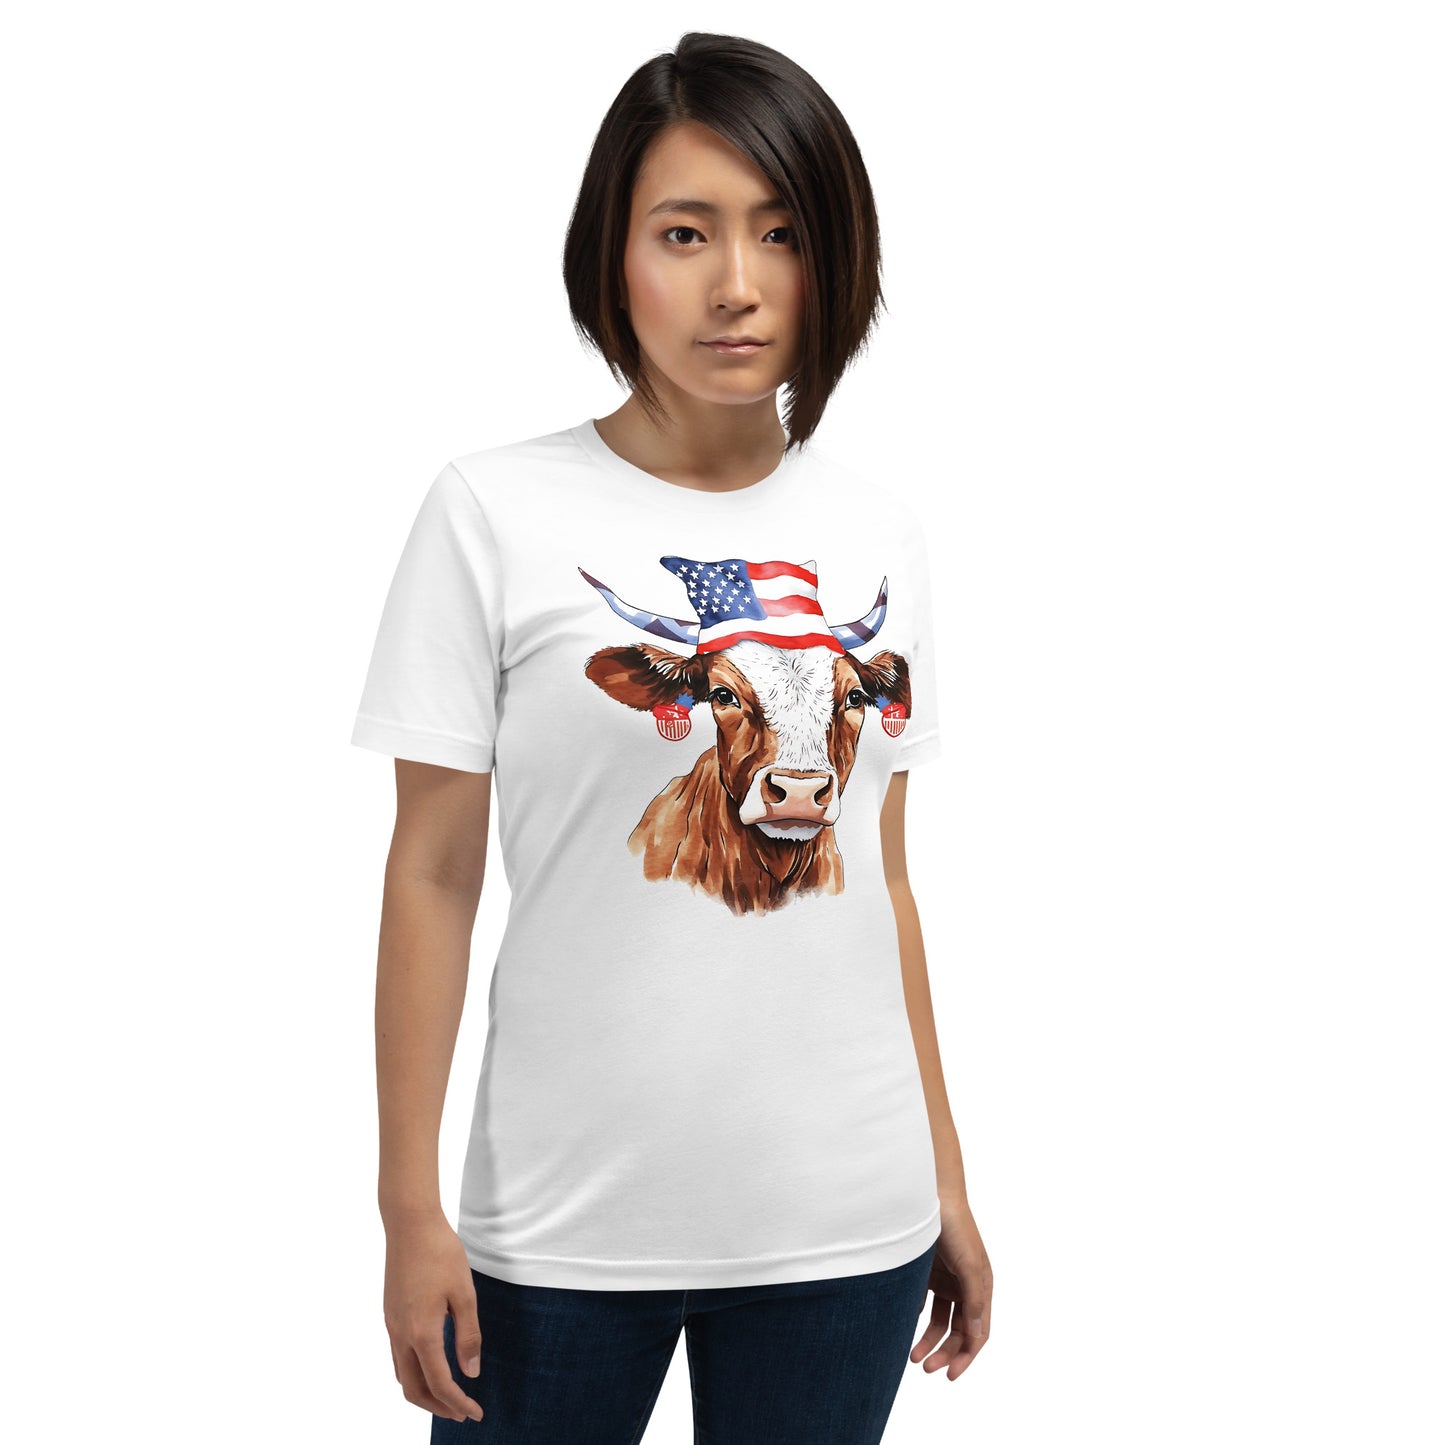 US Patriotic Cow Tshirt For Cow Lovers